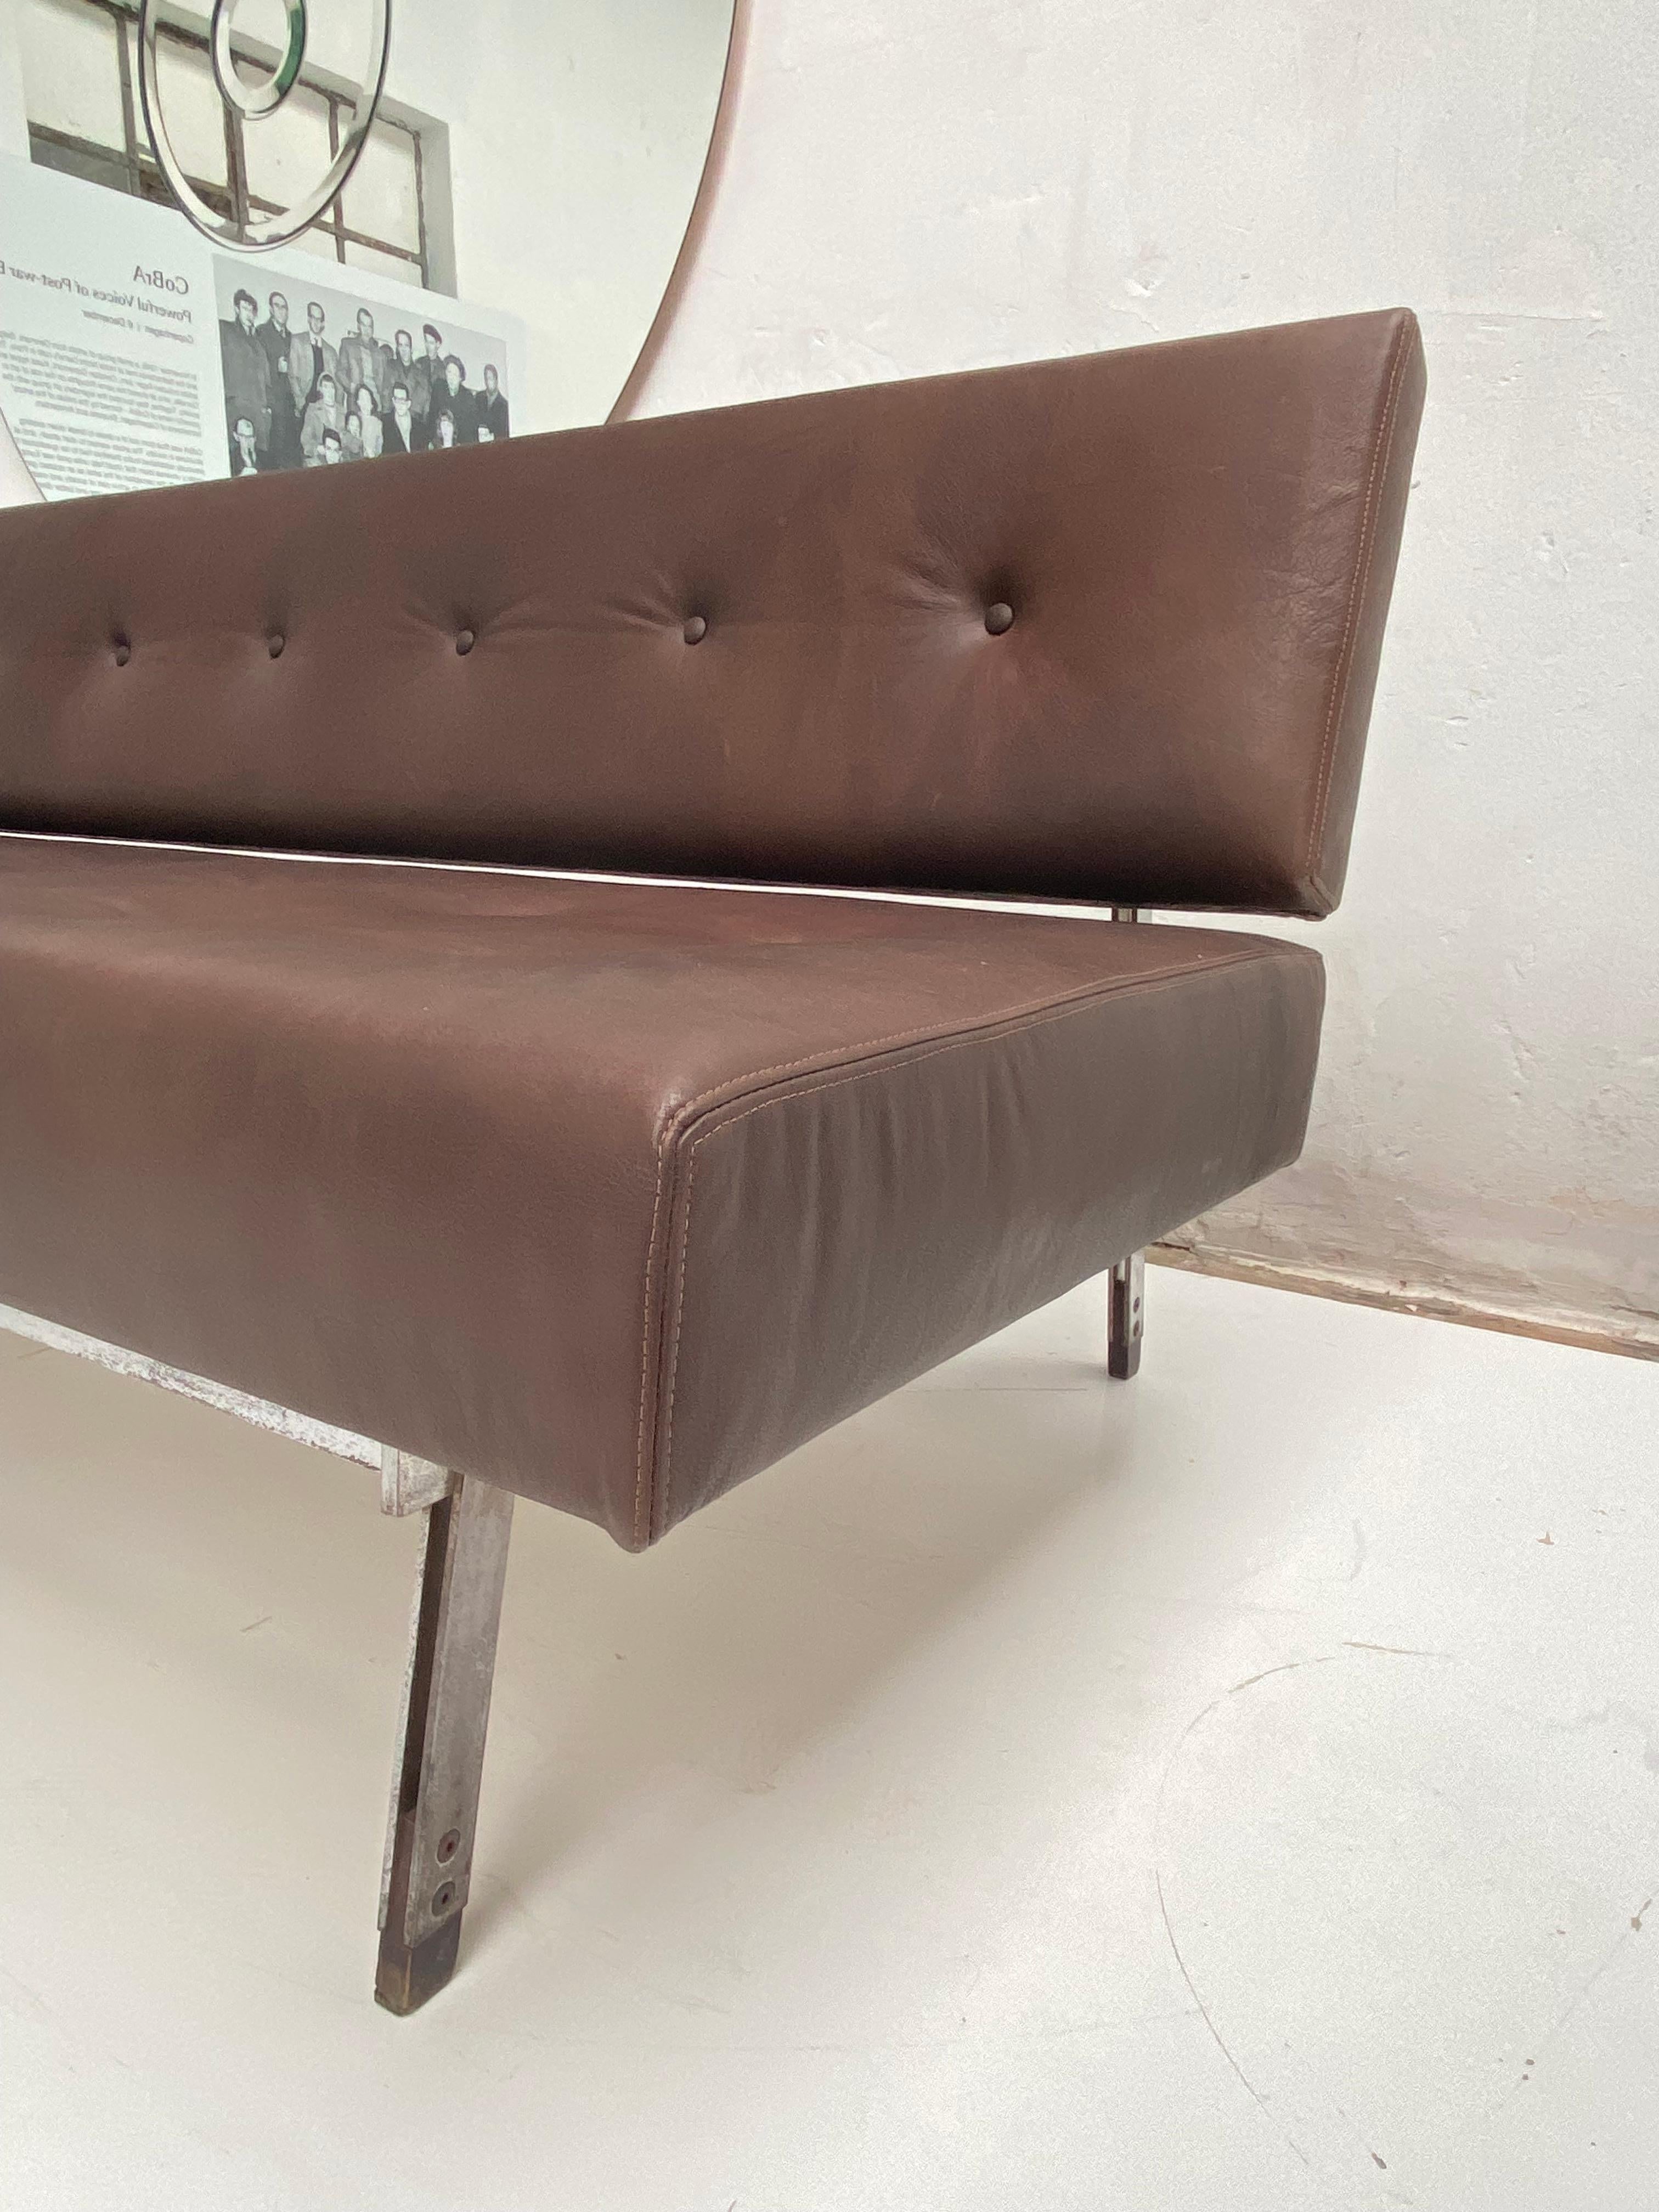 Superb and very rare 1958 '872' sofa by Gianfranco Frattini for Cassina, Italy.

This 3 seat sofa has been newly upholstered with new Pantera TM foam and finished in superb dark brown buttoned leather in our upholstery atelier

Nickel plated legs